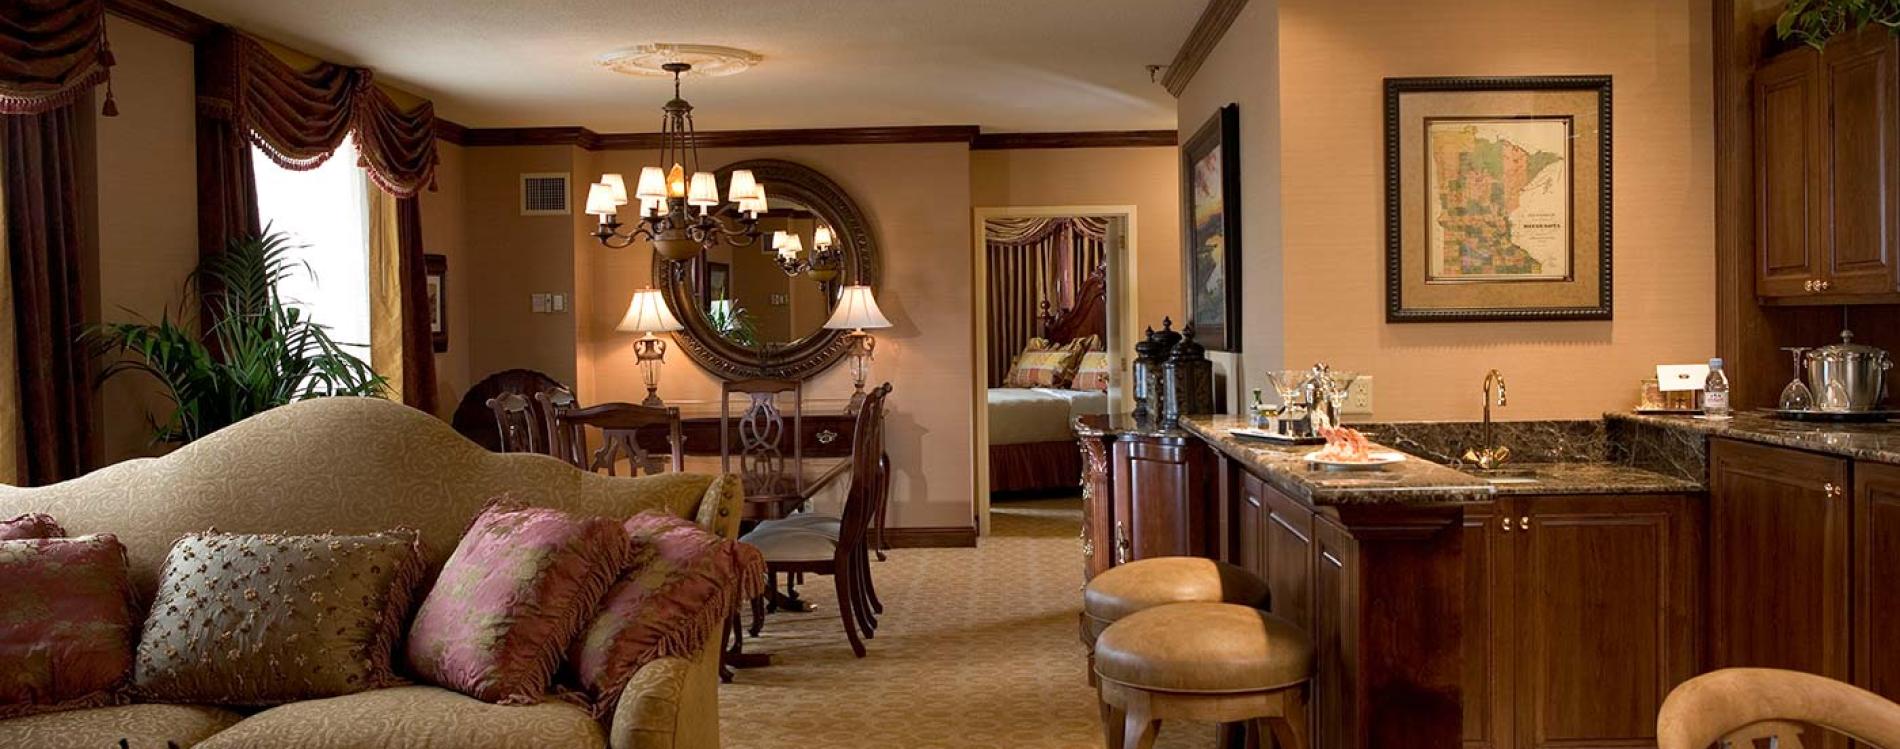 The Saint Paul Hotel is a timeless and gorgeous historic hotel.